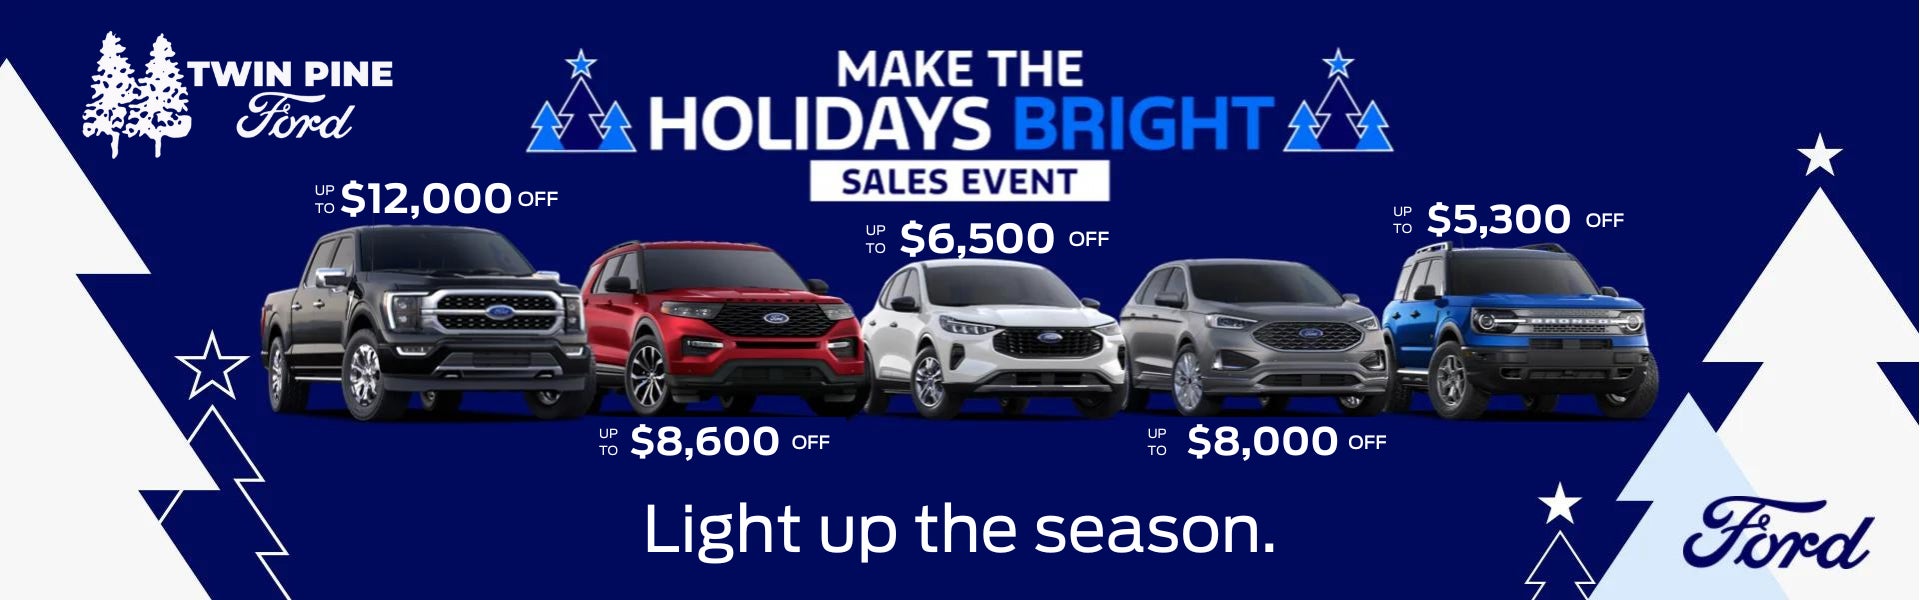 Make the Holidays Bright Sales Event